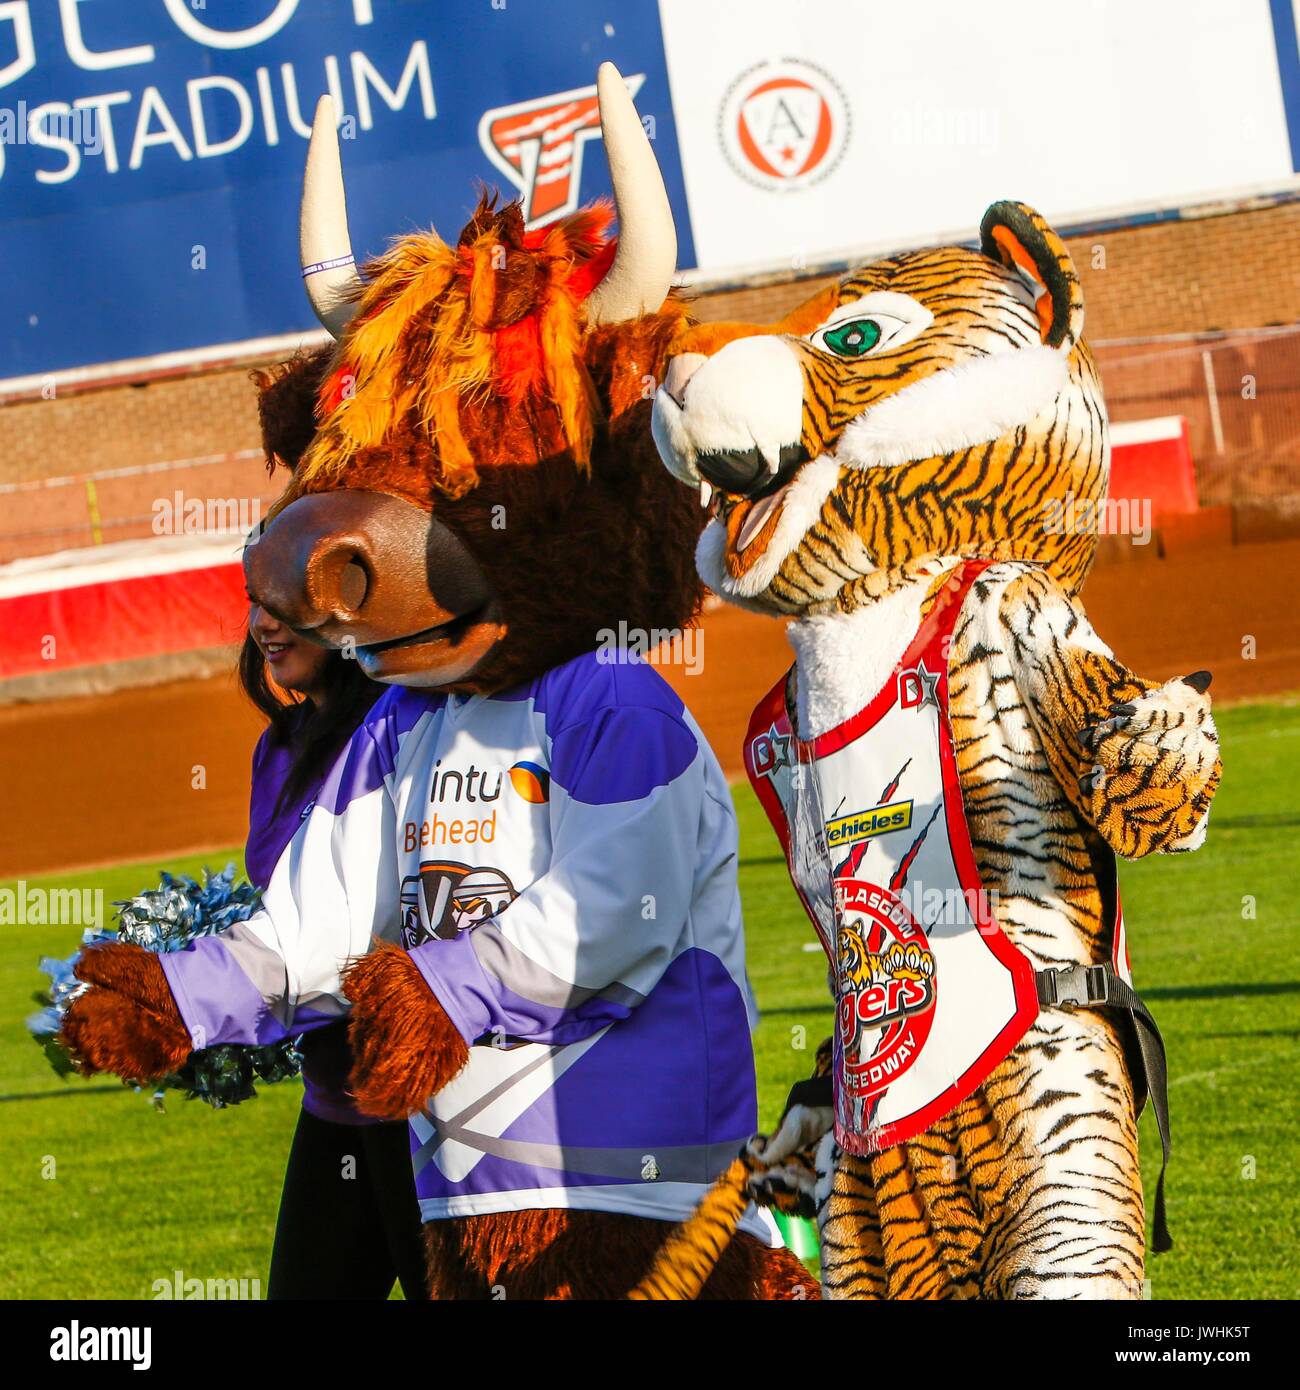 Glasgow, Scotland, UK. 12th August, 2017. Glasgow Tigers Welcomed Clangus and the Girls from Braehead Clan Credit: Colin Poultney/Alamy Live News Stock Photo